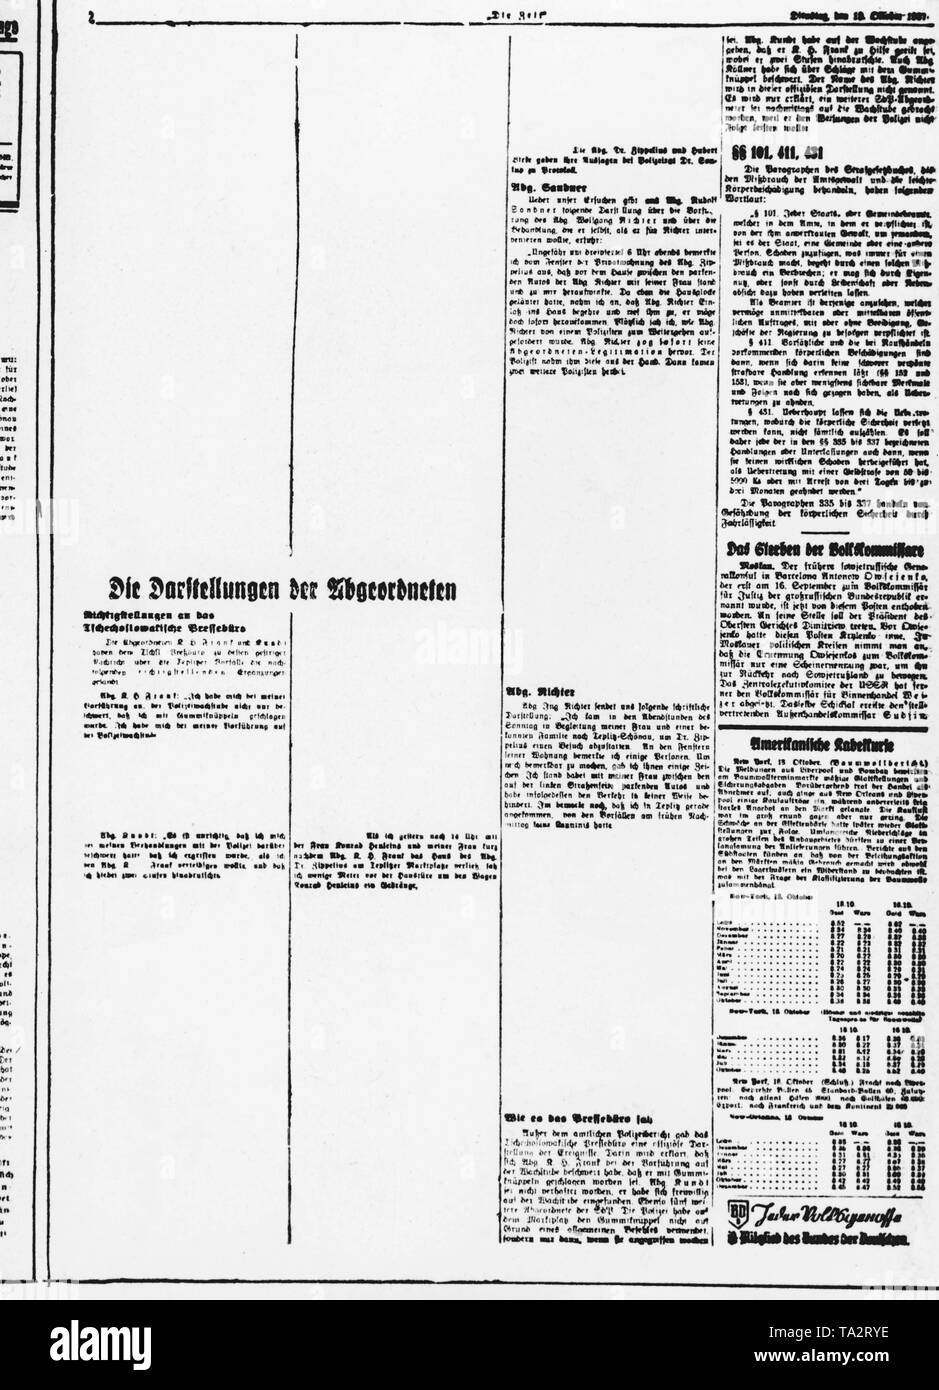 Page of the Sudeten German newspaper 'Die Zeit'. The issue reports on the demonstration in Teplitz-Schoenau (today Teplice). The article was censored by the Prager Amtliches Nachrichtenbuero (Official News Agency of Prague). Since the seizure of power of the National Socialists in Germany, the conflicts between the Sudeten German minority and the Czechoslovaks had intensified. Stock Photo